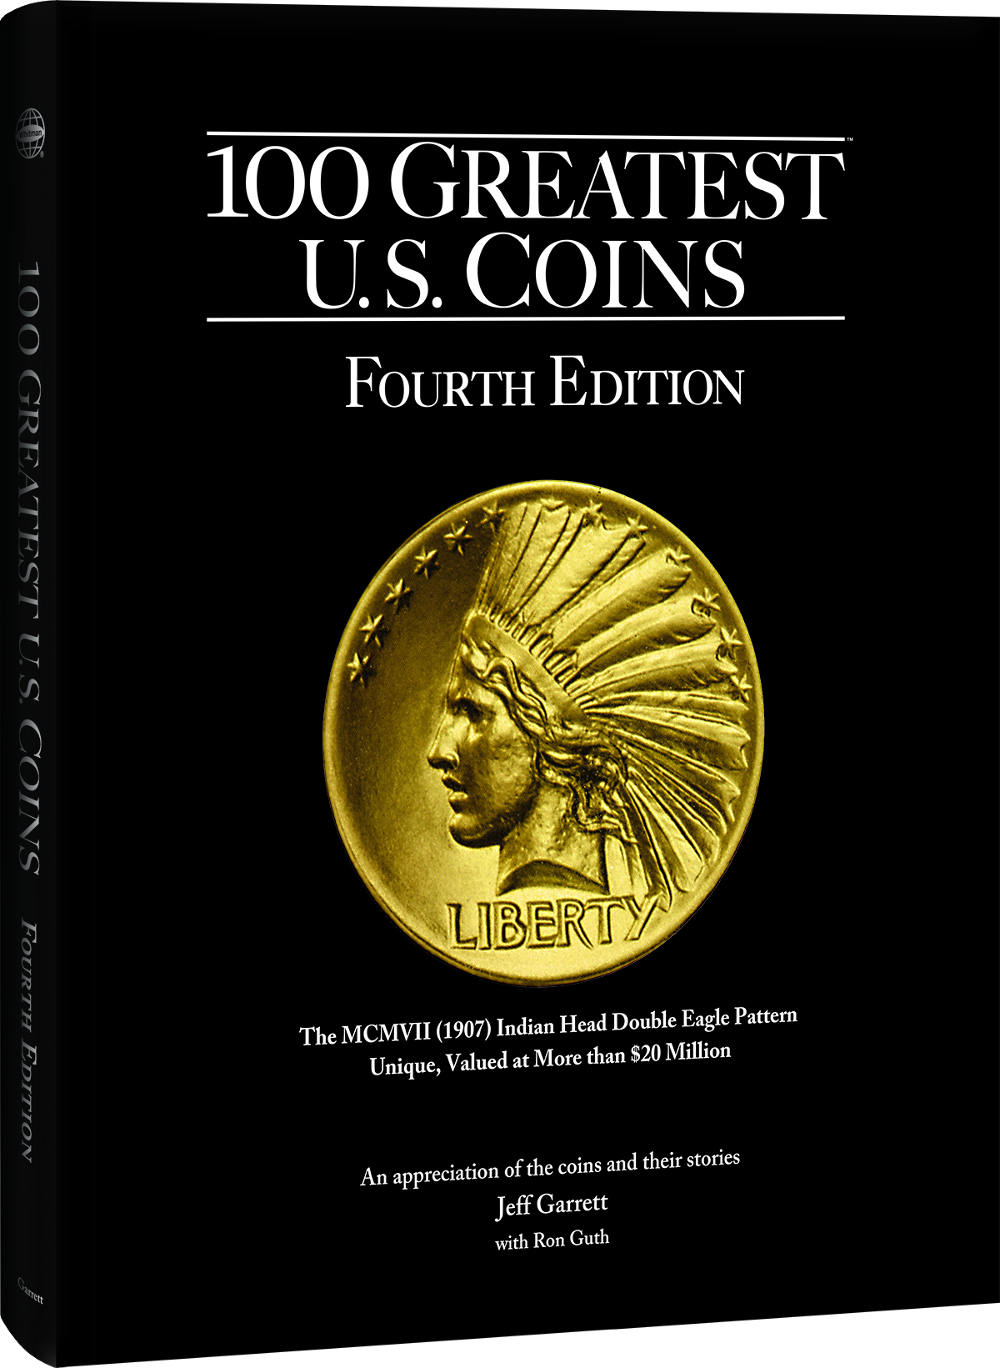 Image of 100 Greatest U.S. Coins, Fourth Edition